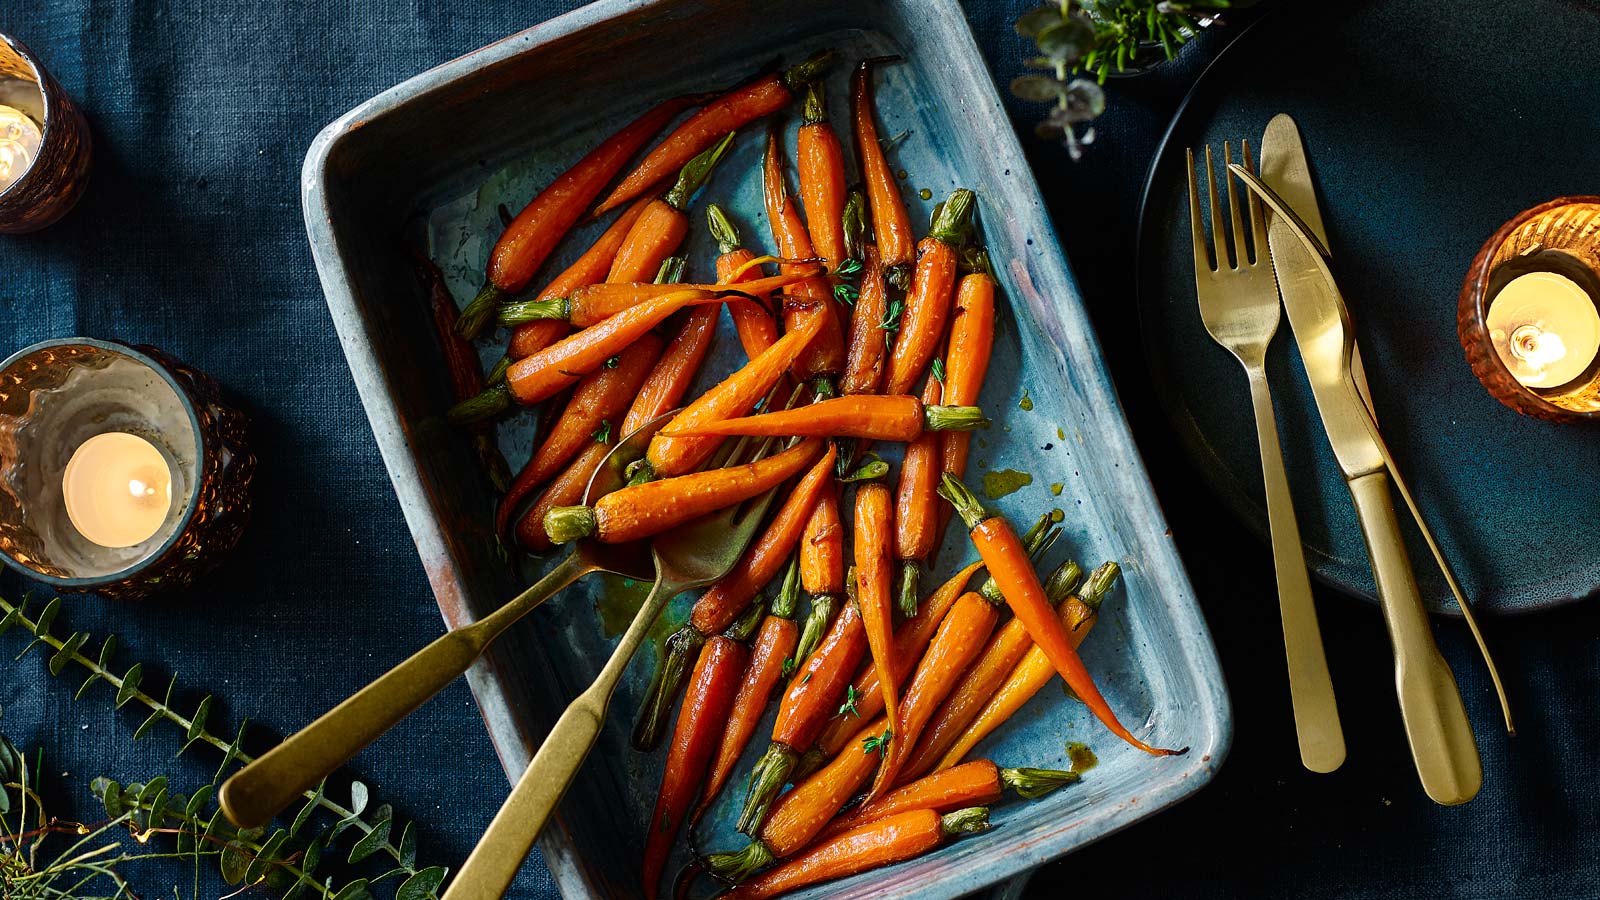 The Snacks You Love and the Veggies You Hate Will Determine Your Age With Alarming Accuracy Honey glazed roasted carrots